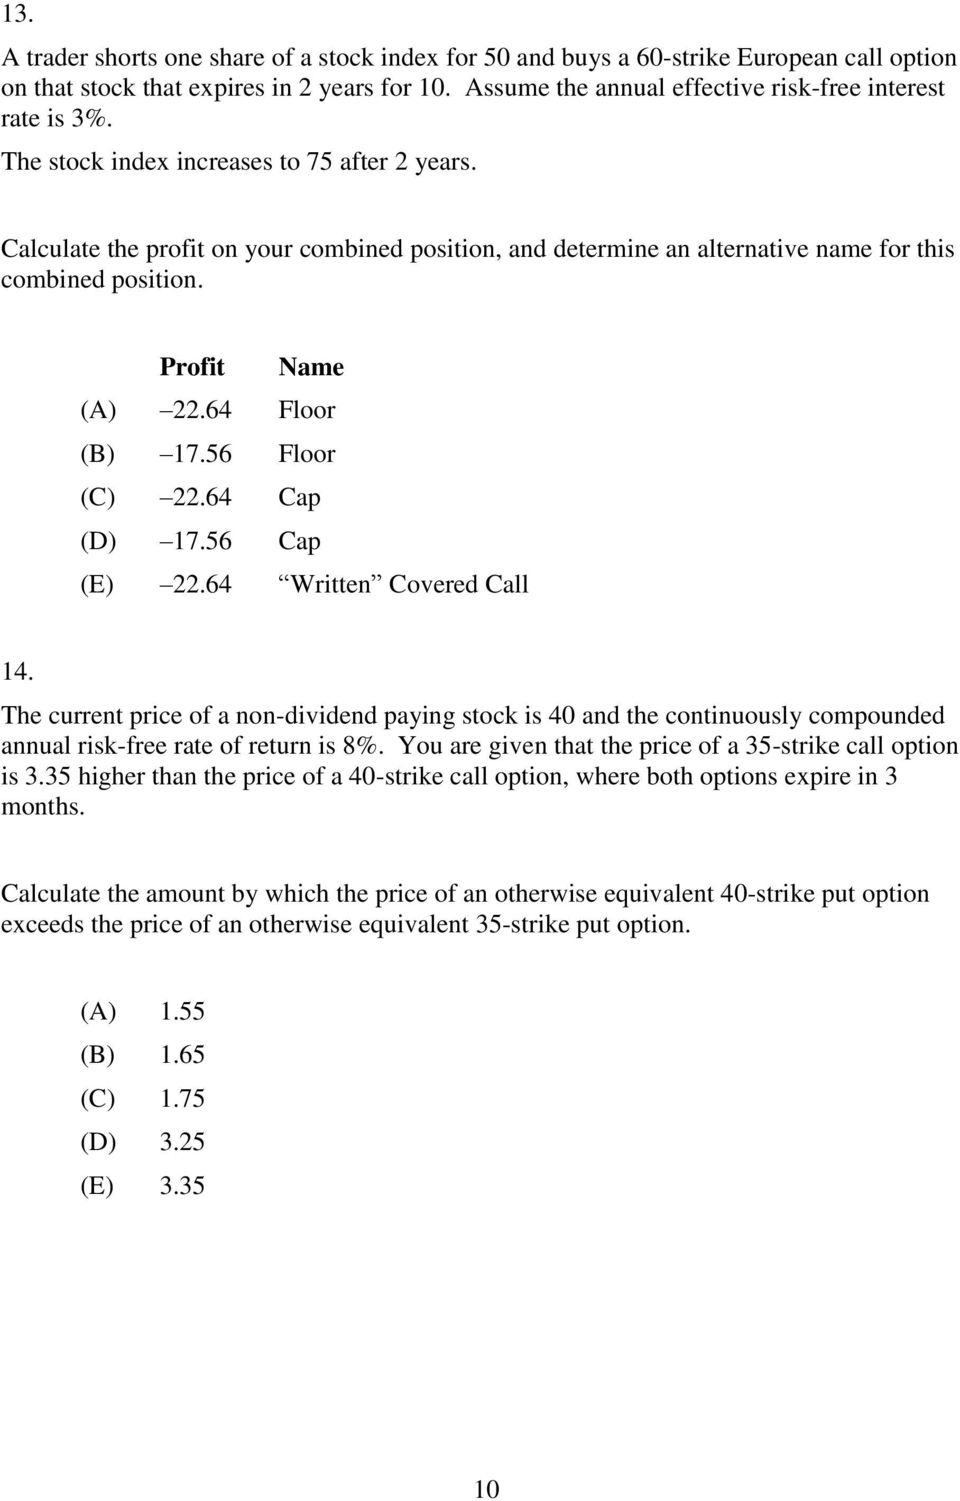 64 Cap 17.56 Cap 22.64 Written Covered Call 14. The current price of a non-dividend paying stock is 40 and the continuously compounded annual risk-free rate of return is 8%.